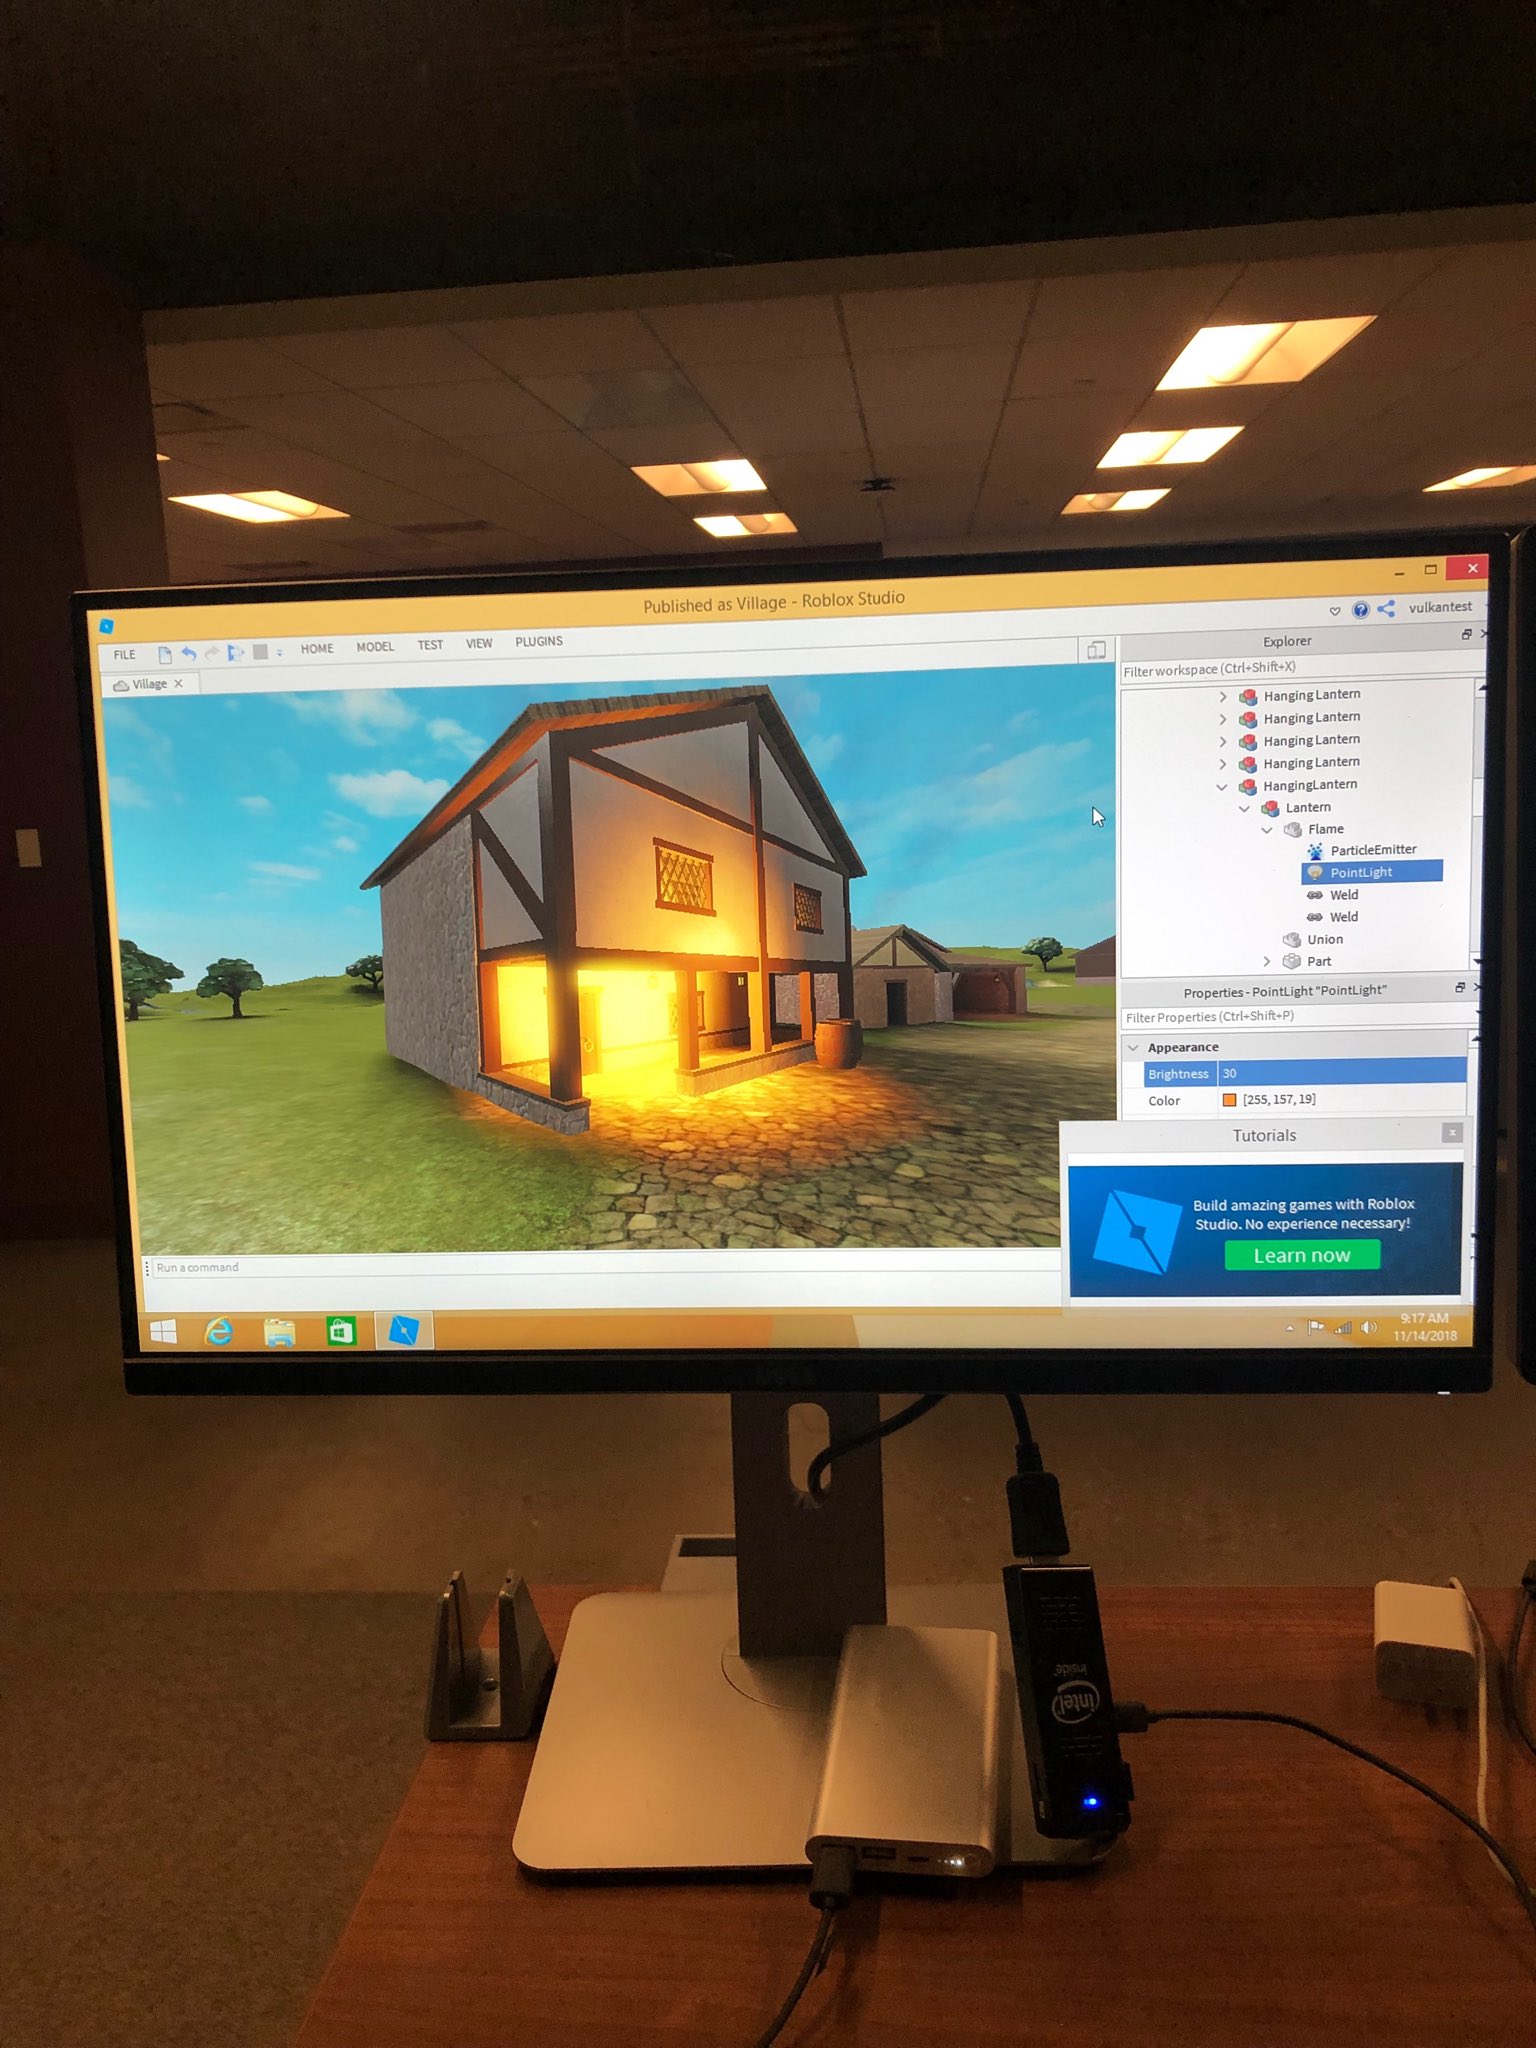 Arseny Kapoulkine On Twitter Roblox Future Is Bright Phase 1 Running On A 35 Computer Hanging Under The Monitor Using A Phone Battery Pack Next To It At 20 Fps Https T Co 2jbow65zoi - roblox studio point light